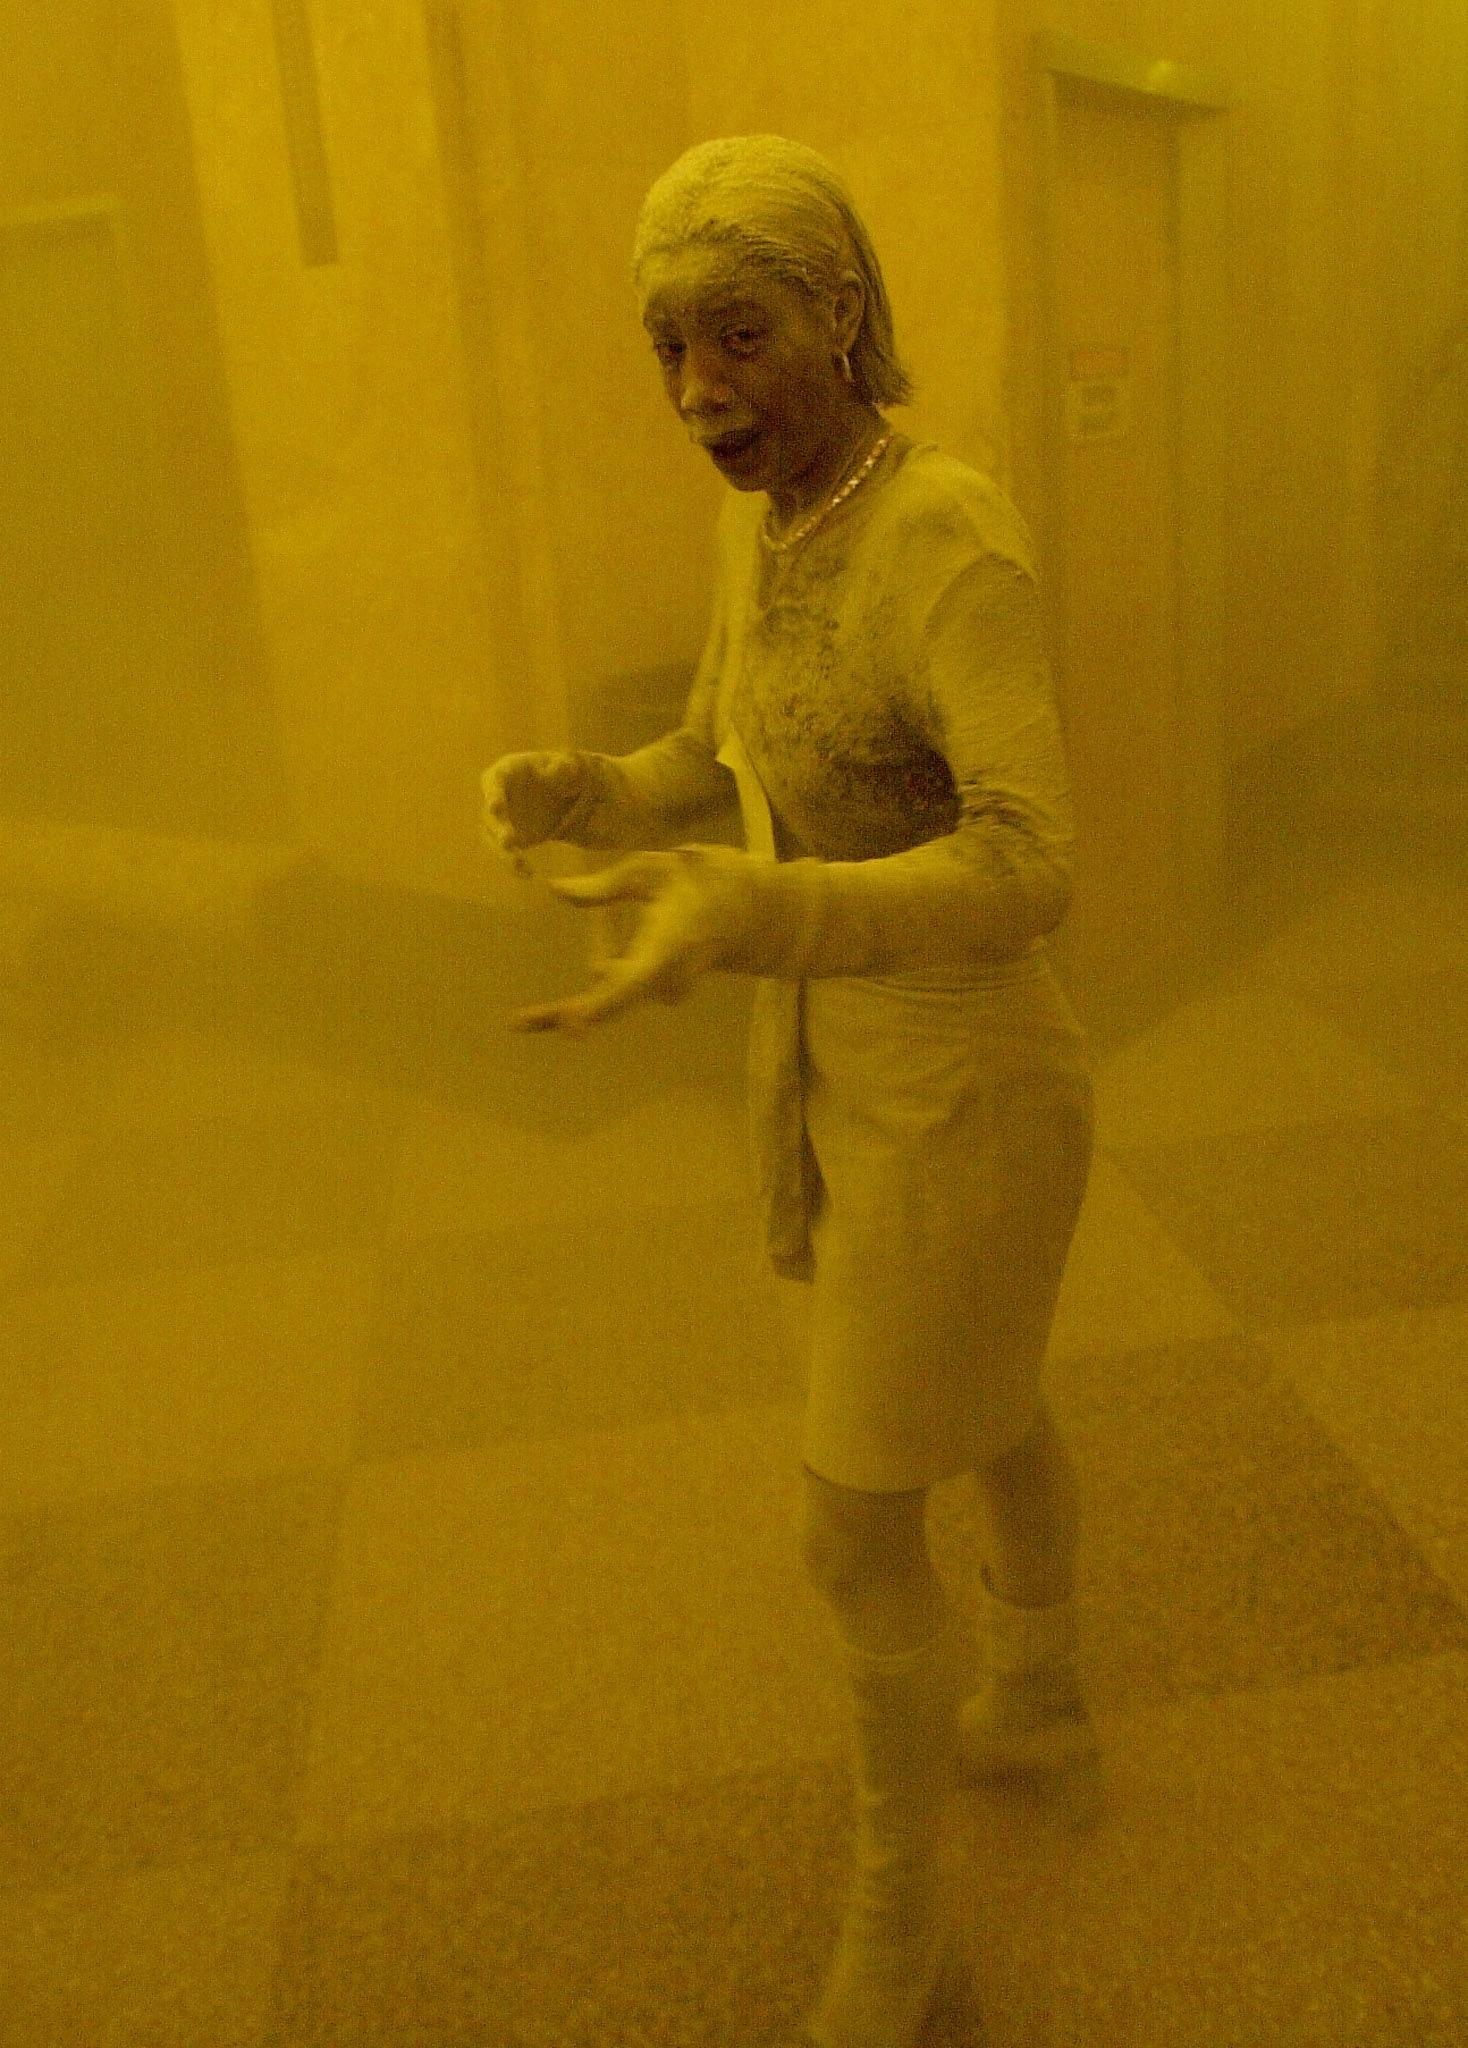 This 11 September 2001 file photo shows Marcy Borders covered in dust as she takes refuge in an office building after one of the World Trade Center towers collapsed in New York. Borders was caught outside on the street as the cloud of smoke and dust enveloped the area. (Photo:  STAN HONDA/AFP/Getty Images)